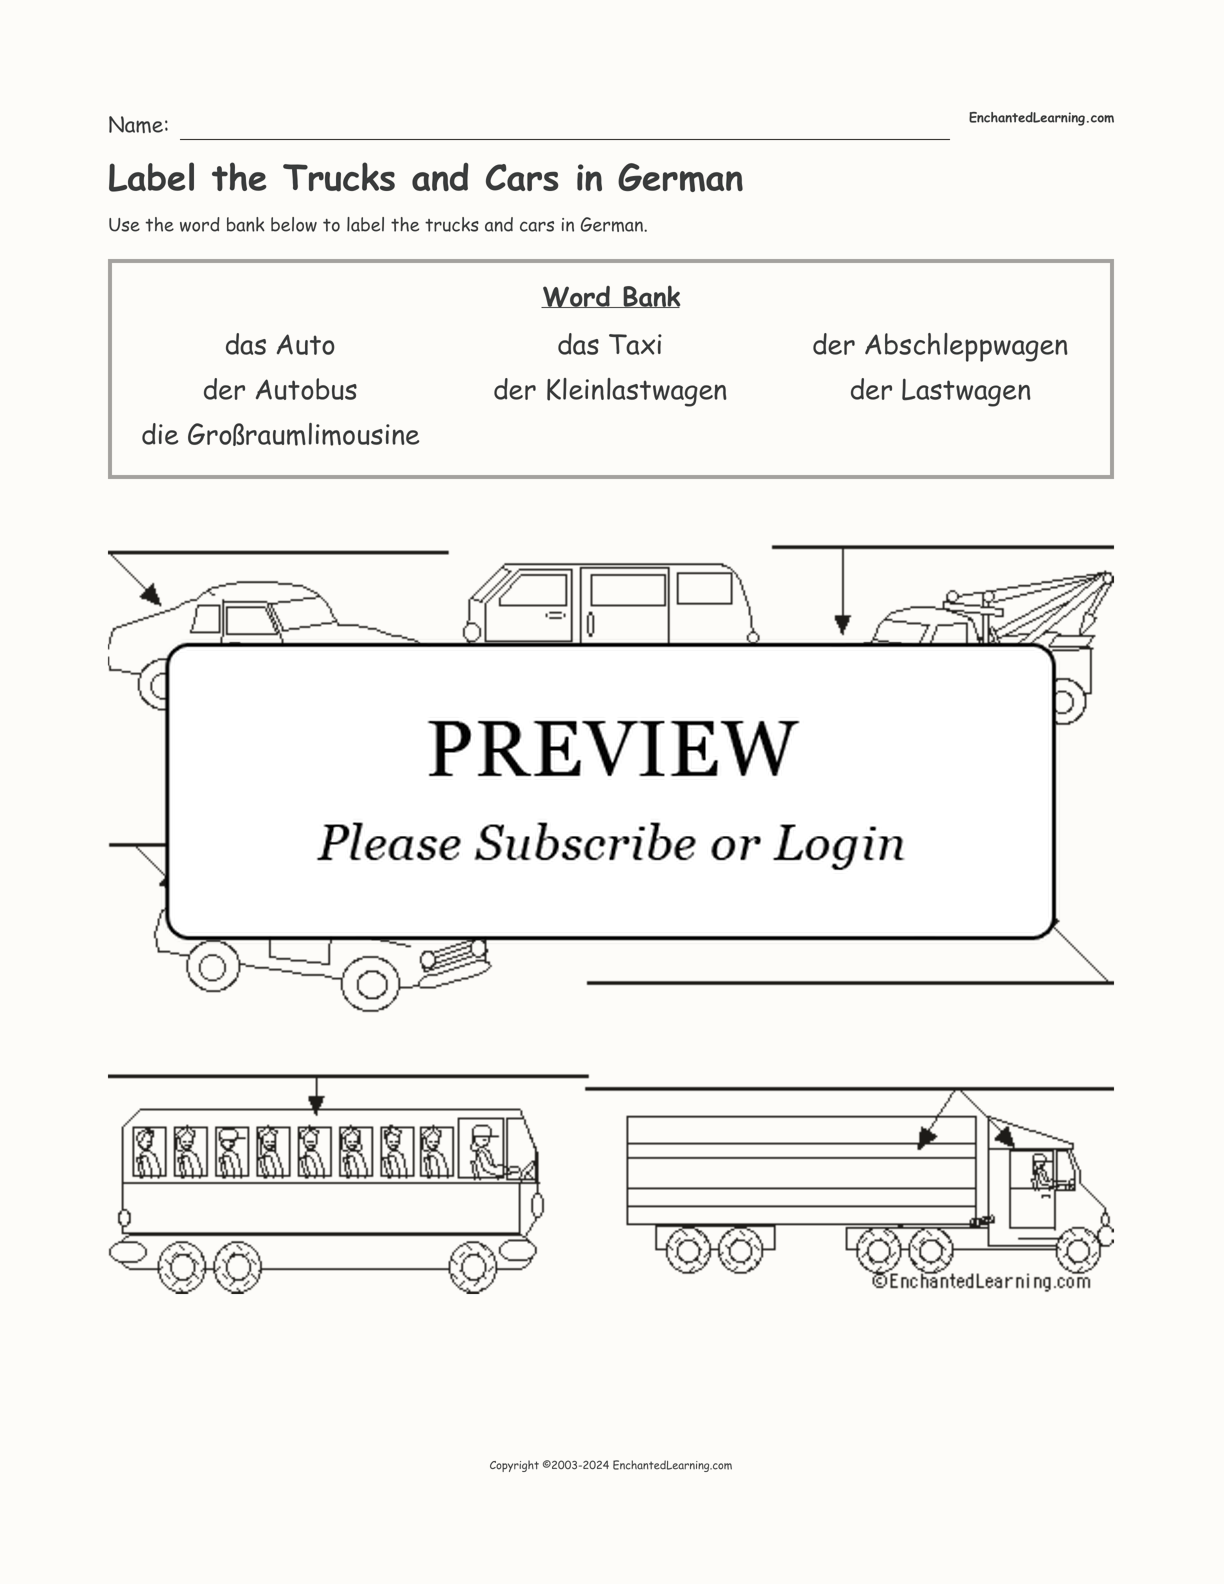 Label the Trucks and Cars in German interactive worksheet page 1